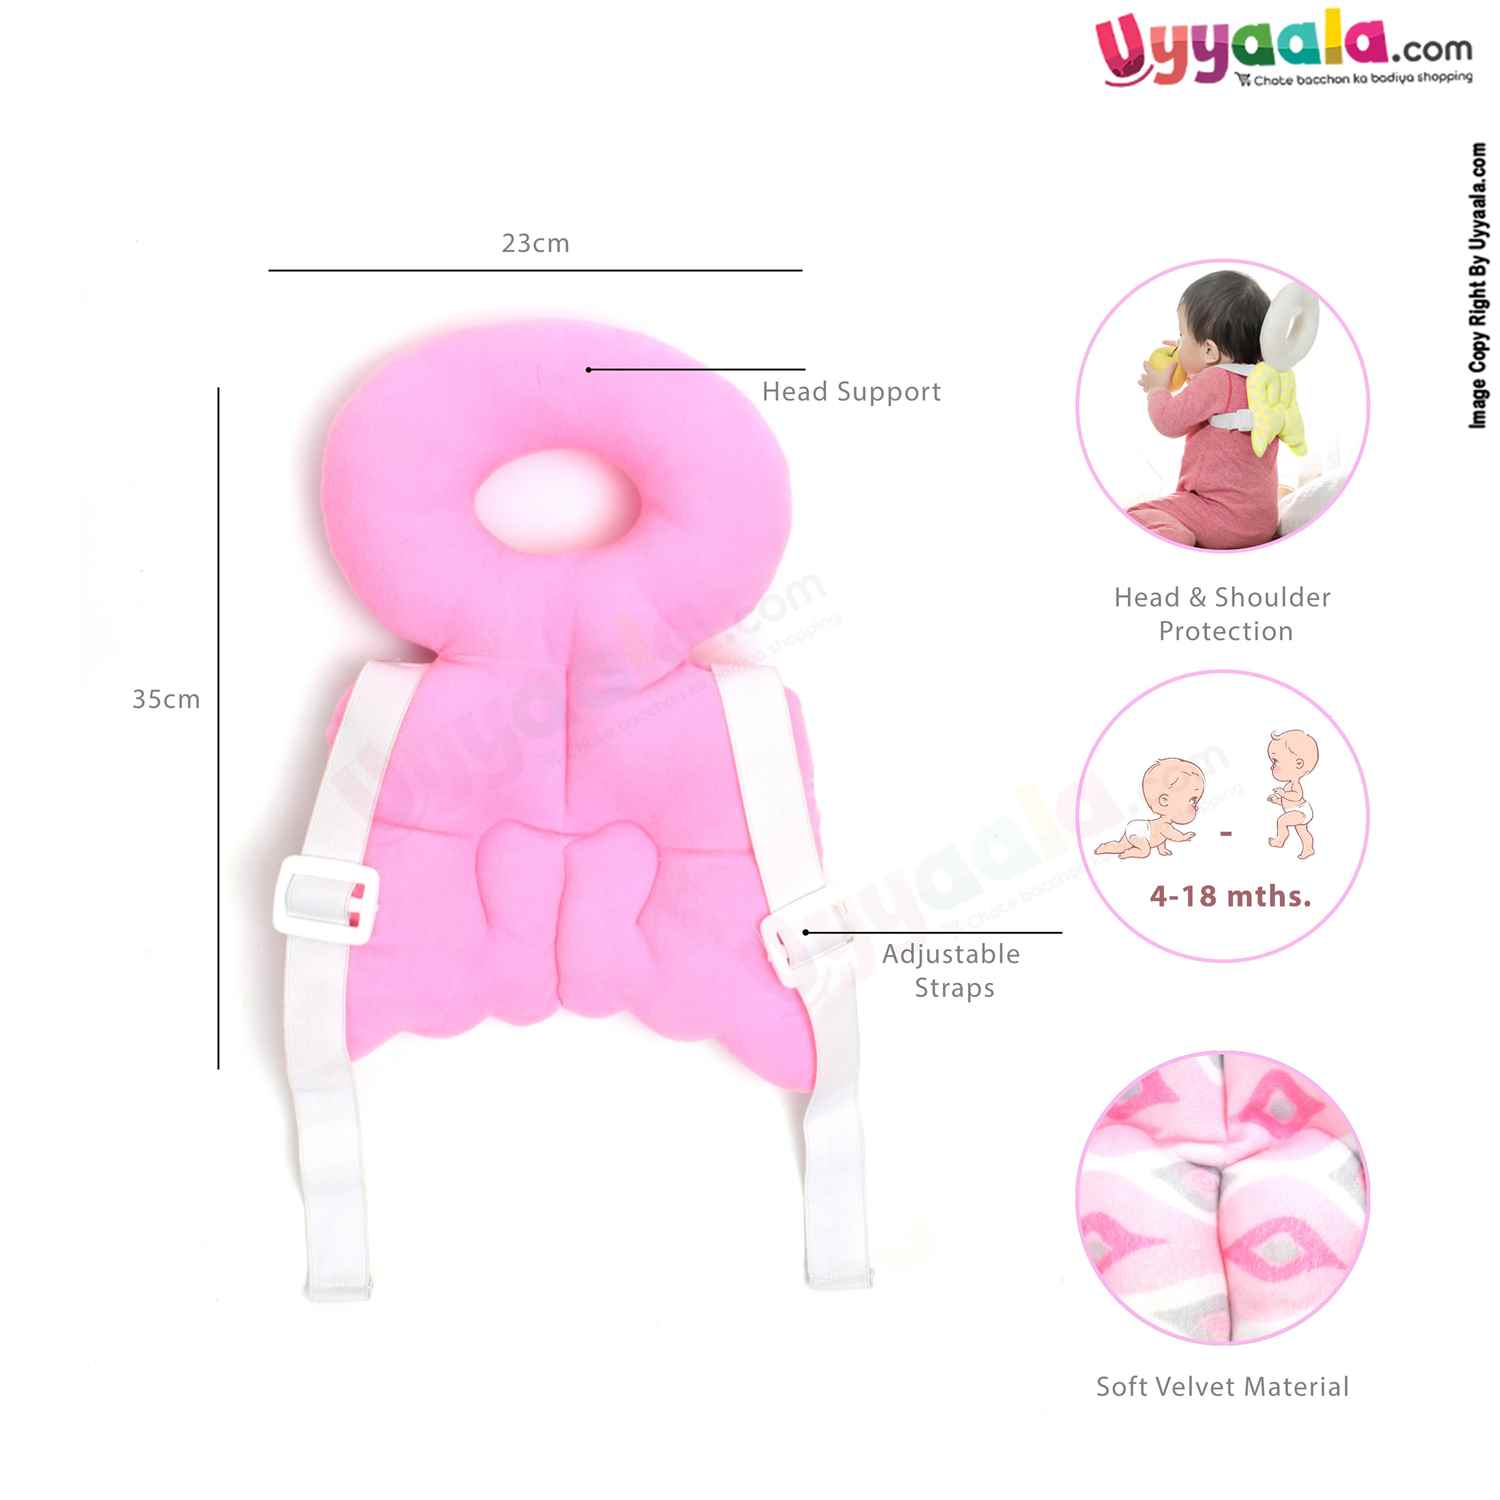 Baby Head Protector with Pillow with Adjustable Straps